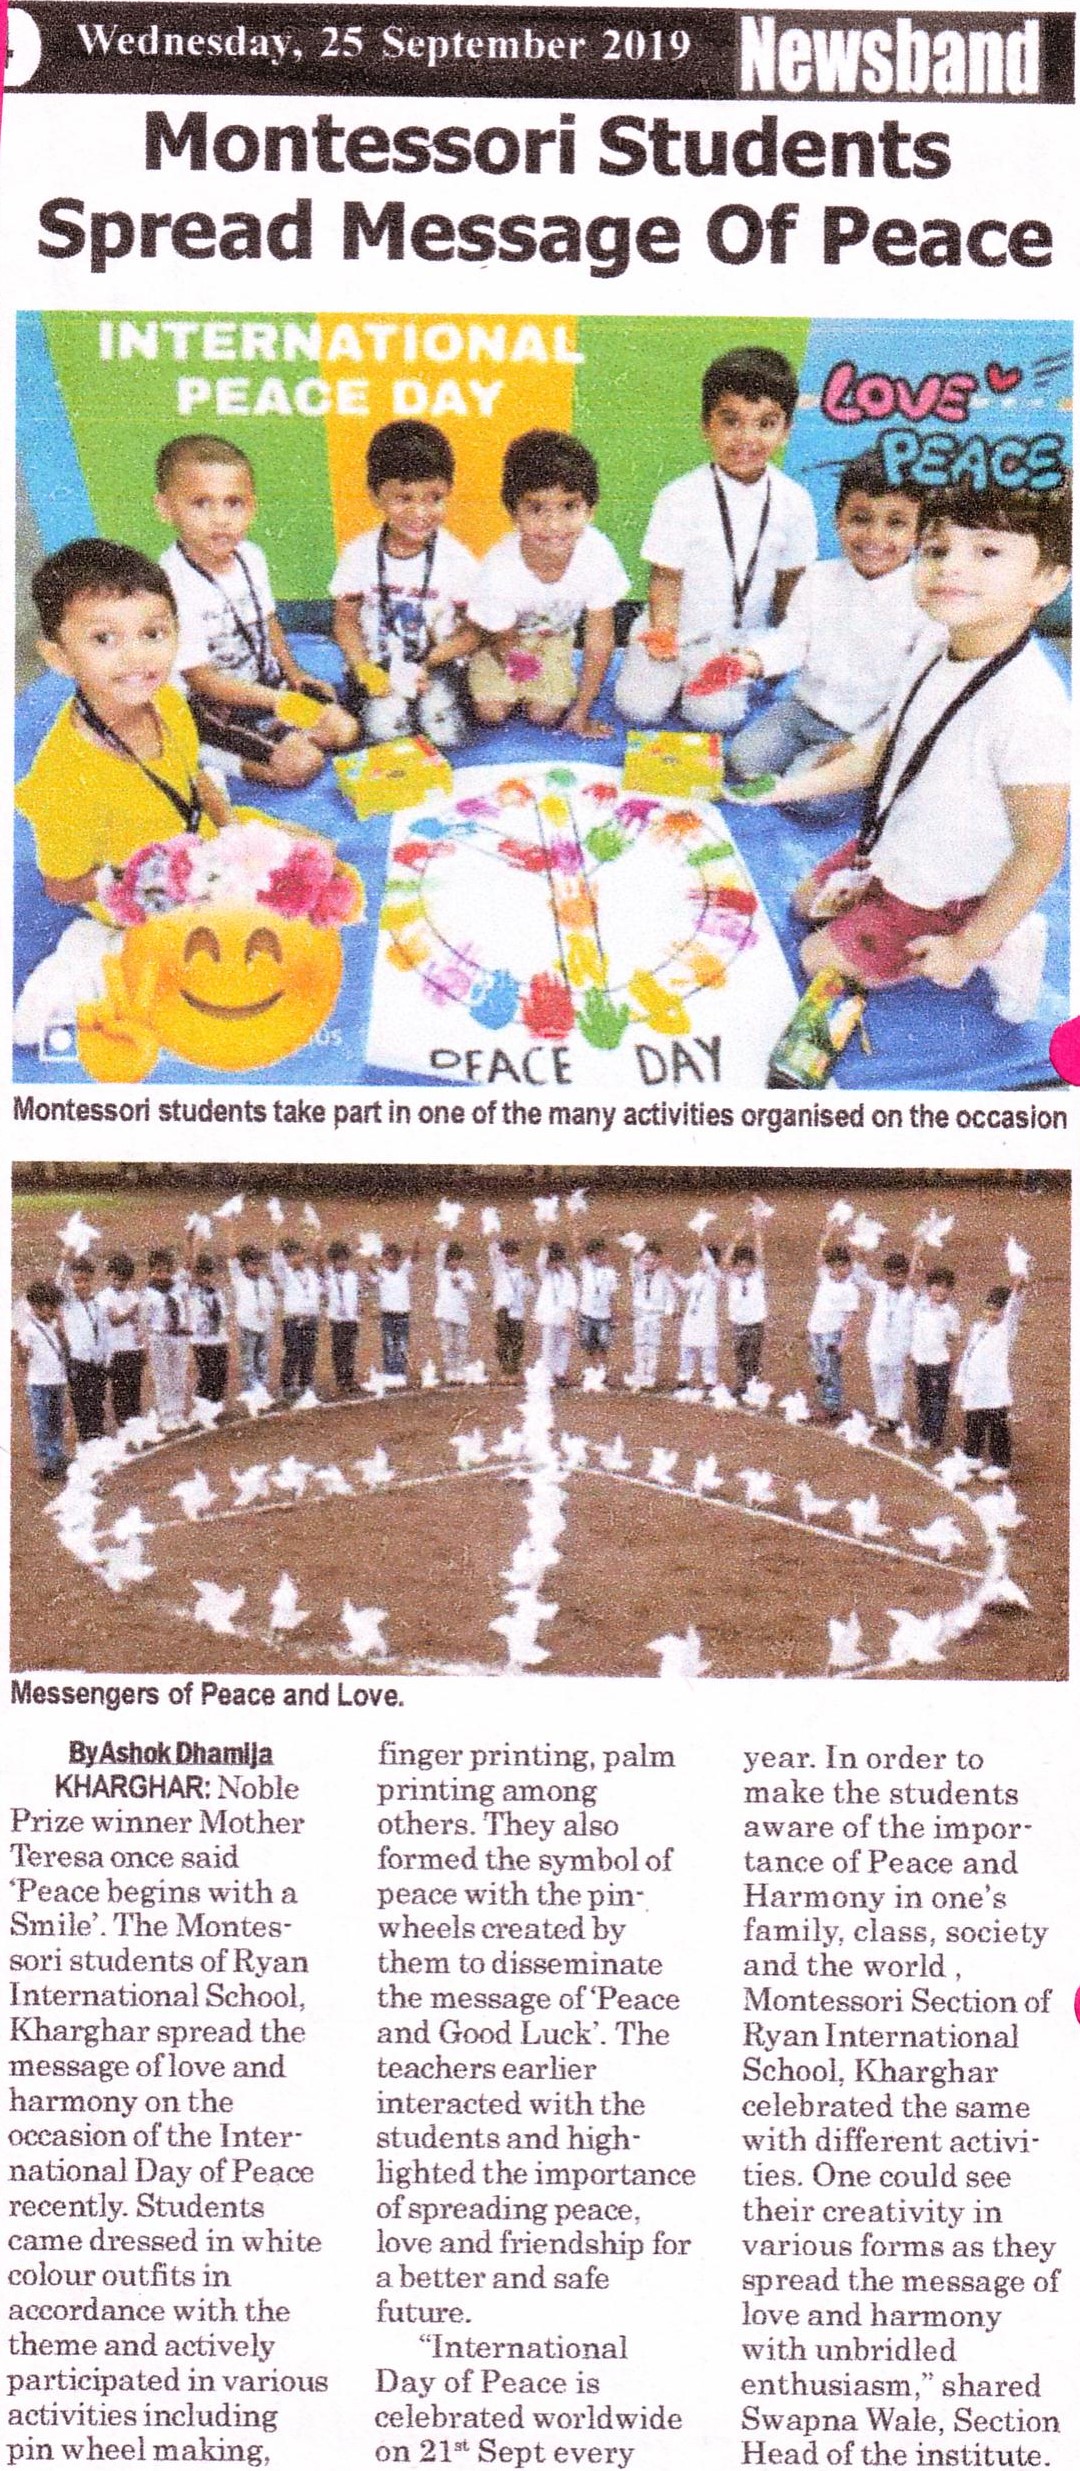 Montessori students spread message of peace was mentioned in Newsband - Ryan International School, Kharghar